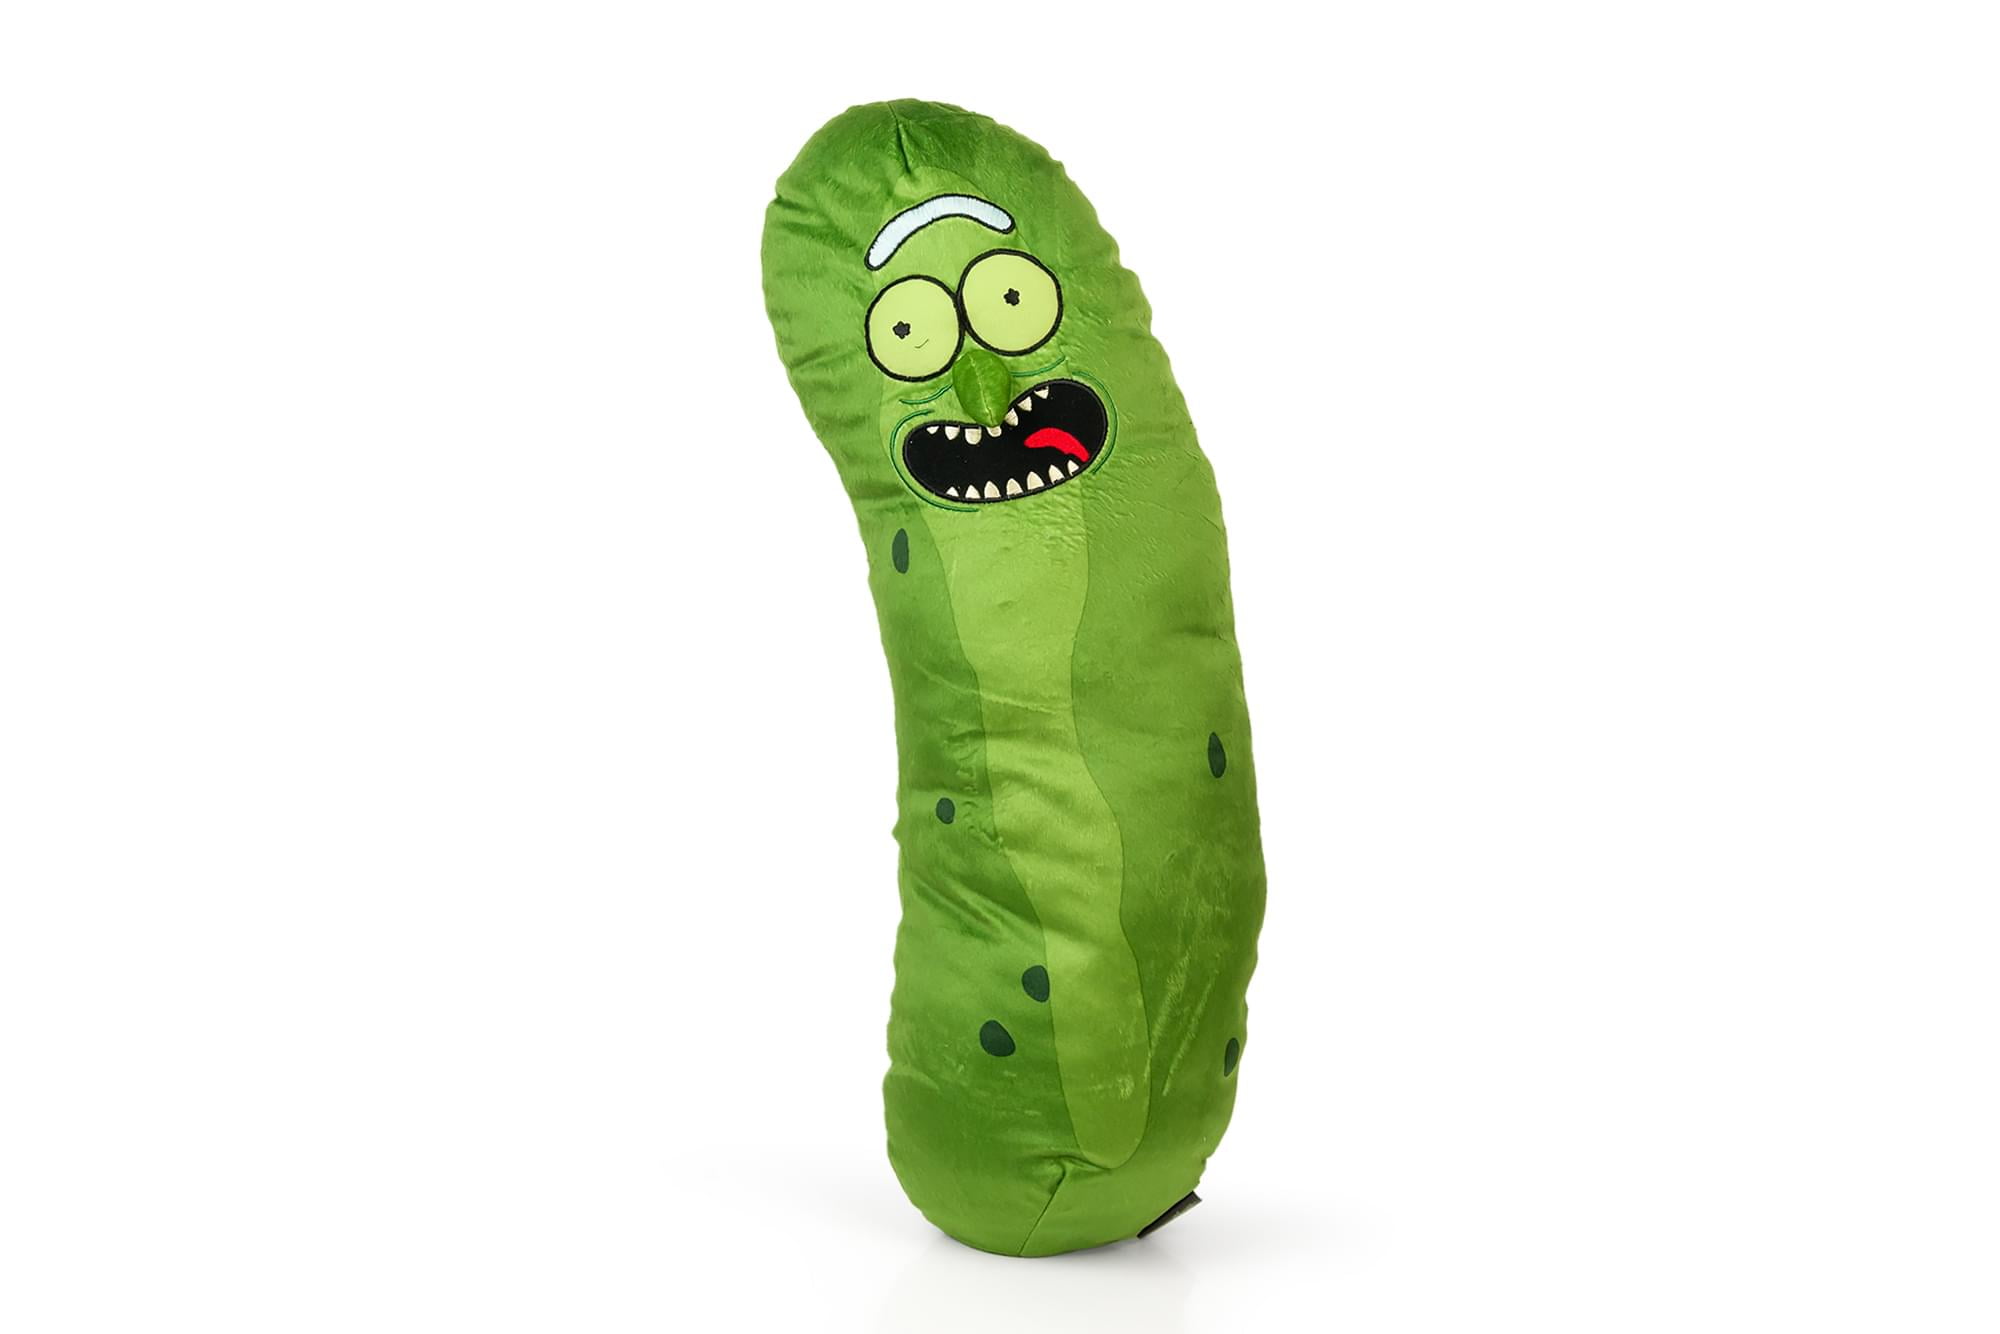 Handmade Pickle Rick Plush Inspired by the Rick and Morty Show FROM USA 